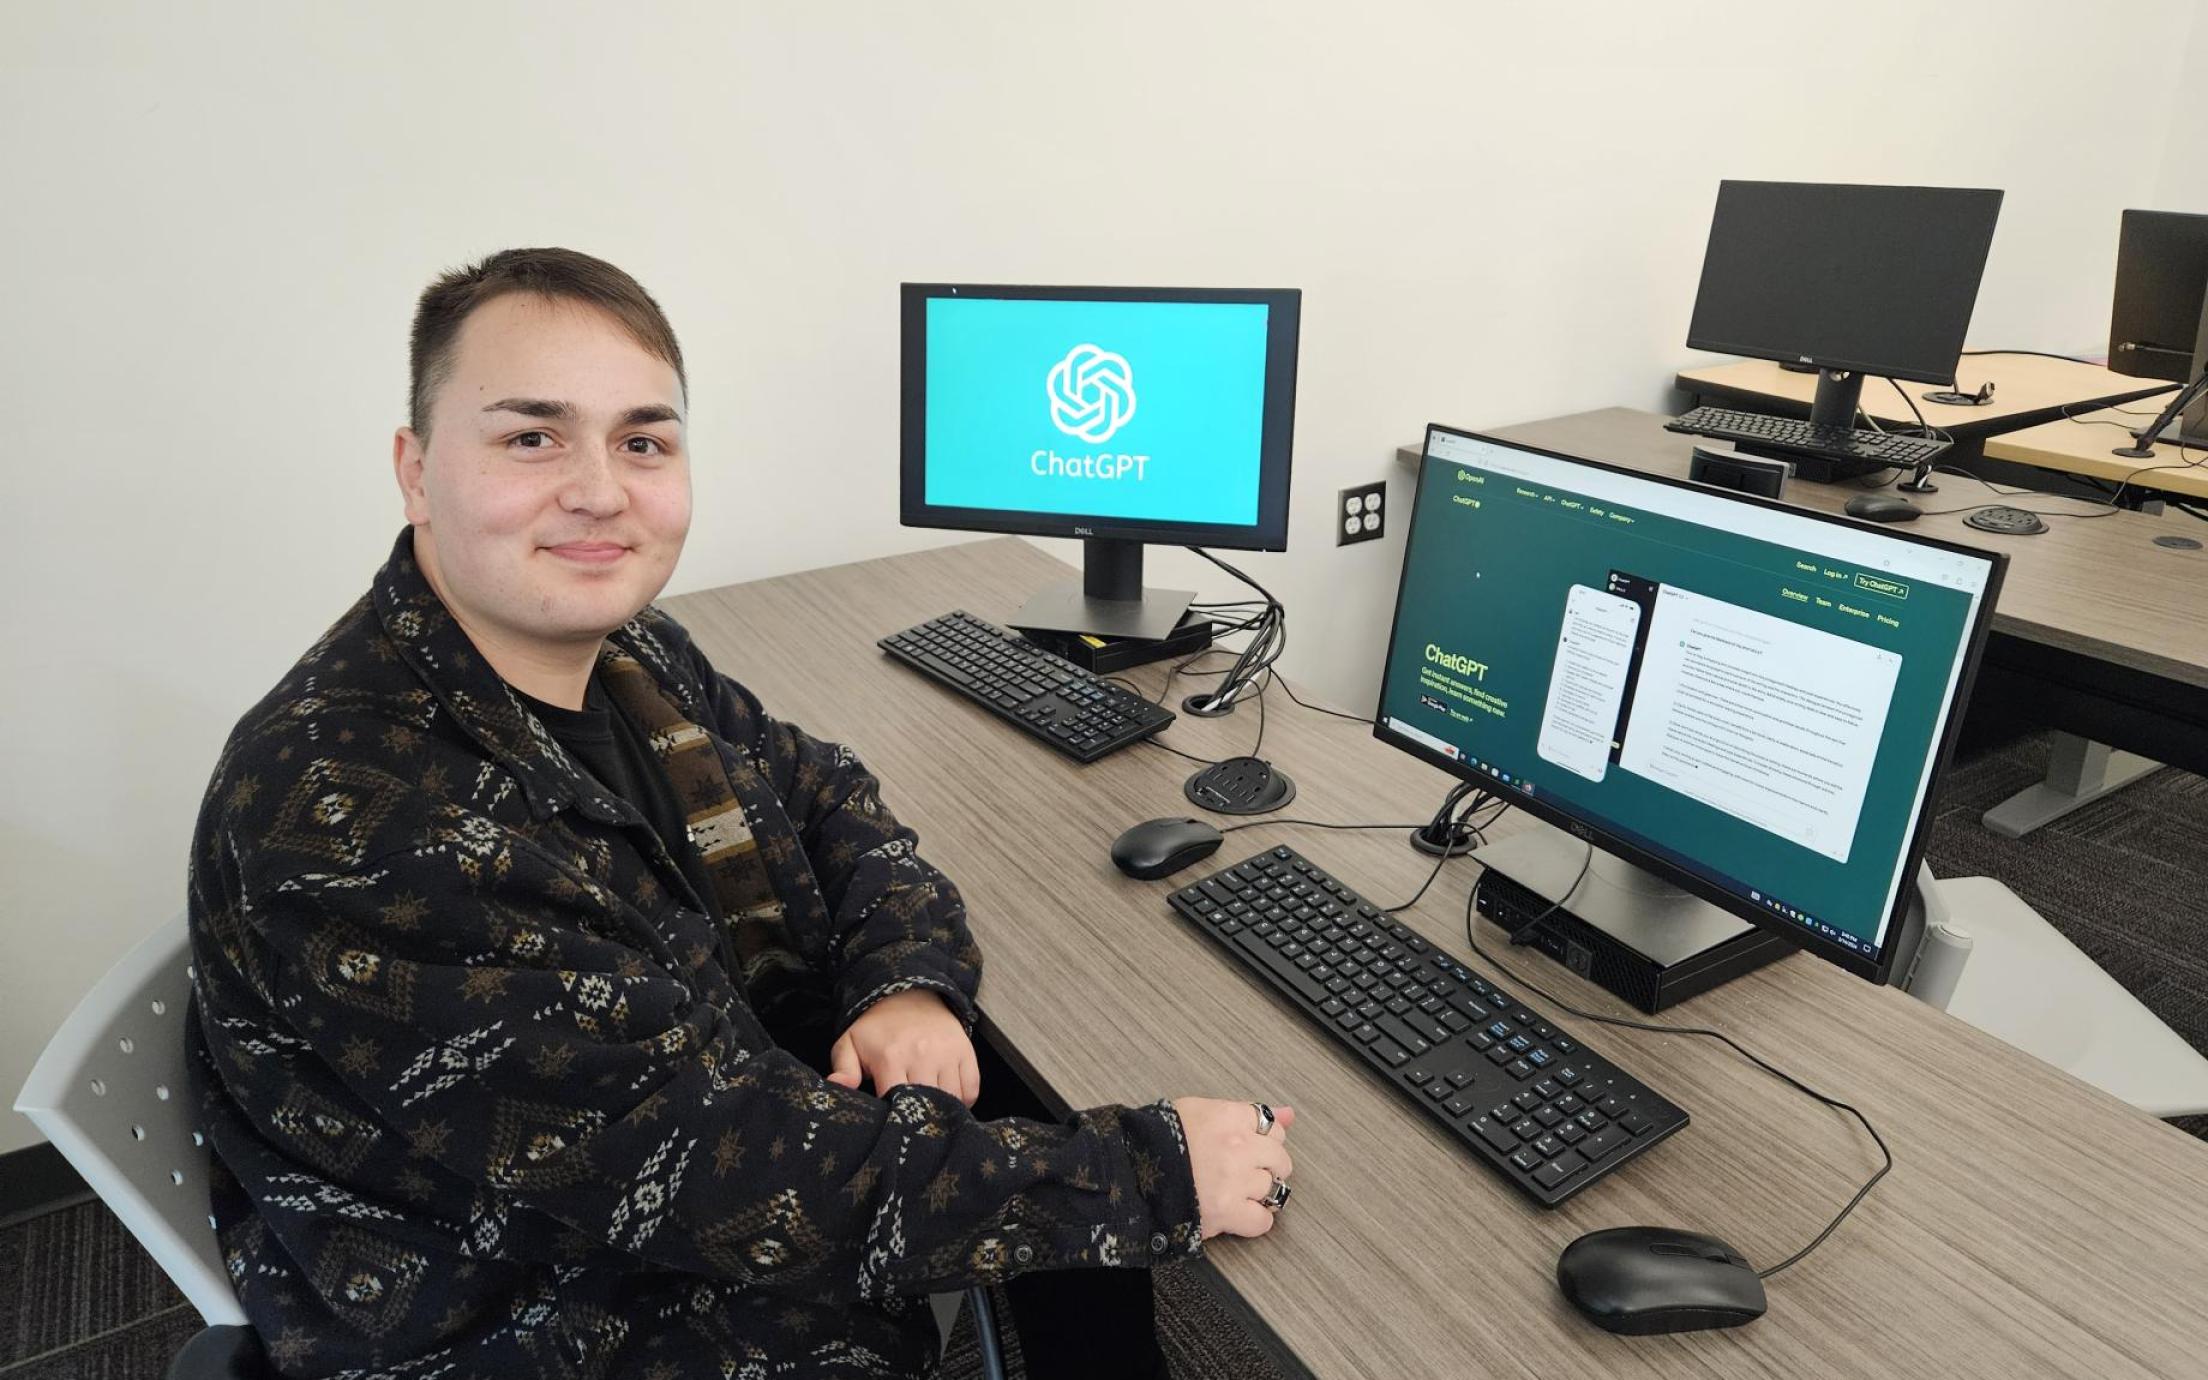 Andrew Szilagyi sitting in front of a computer and smiling at the camera. ChatGPT is on the screen in the background.